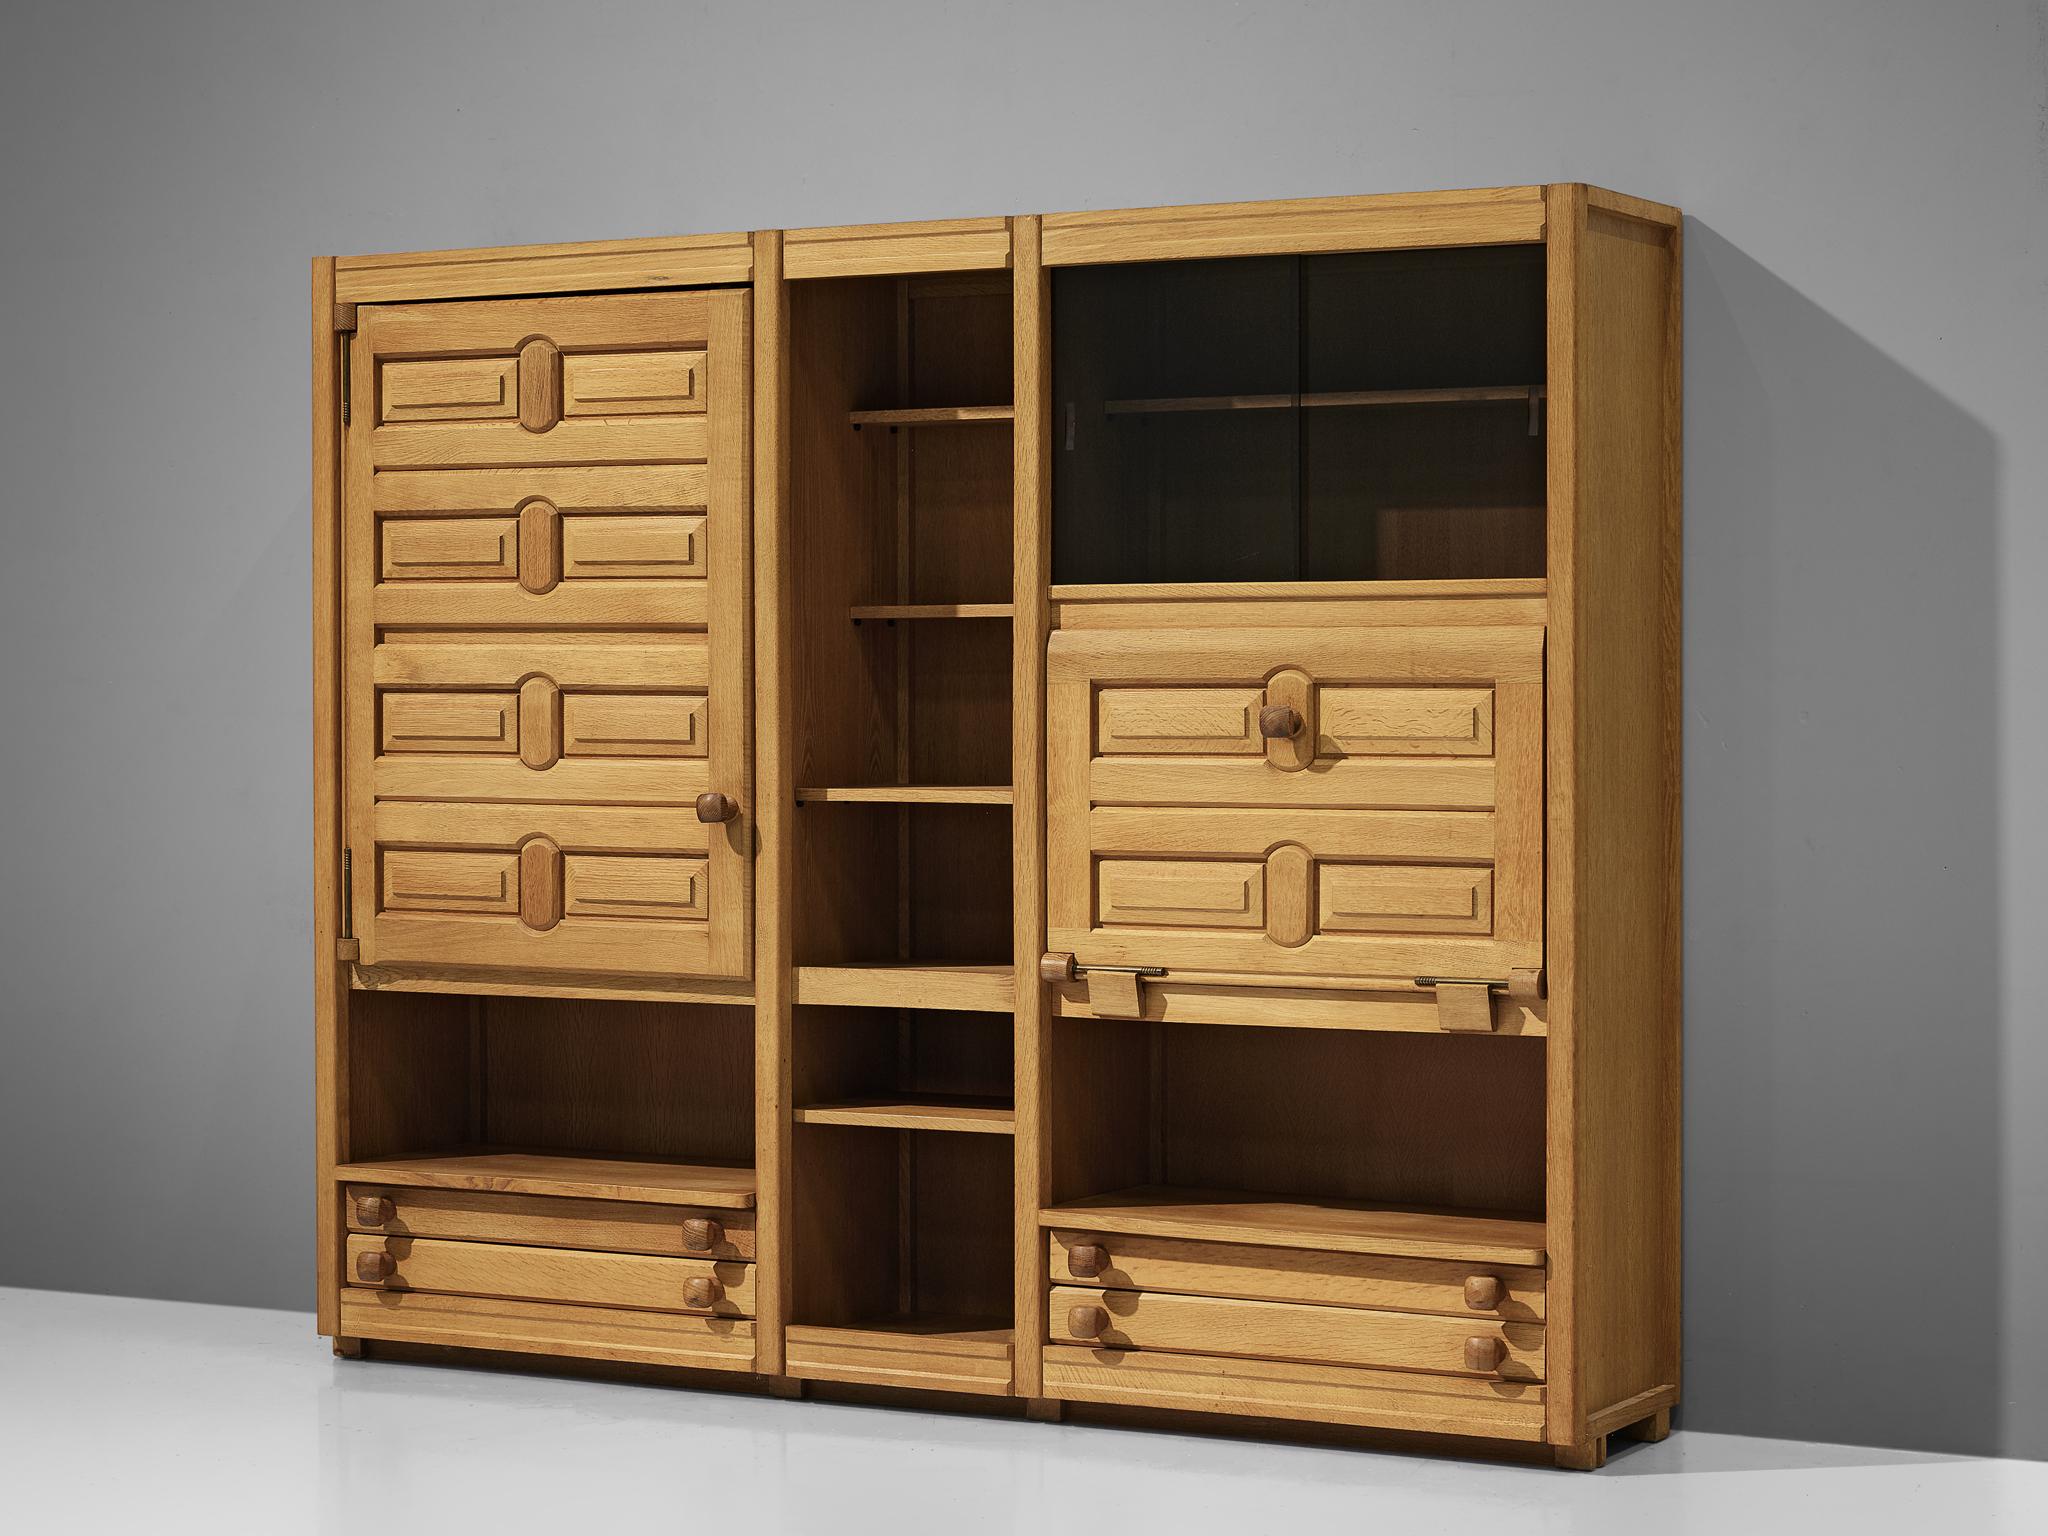 Guillerme and Chambron, highboard, oak, France, 1960s

This high board is designed by Guillerme and Chambron and features geometric engravings on the many different storage spaces such like drawers and shelves. The piece is typical for the design of